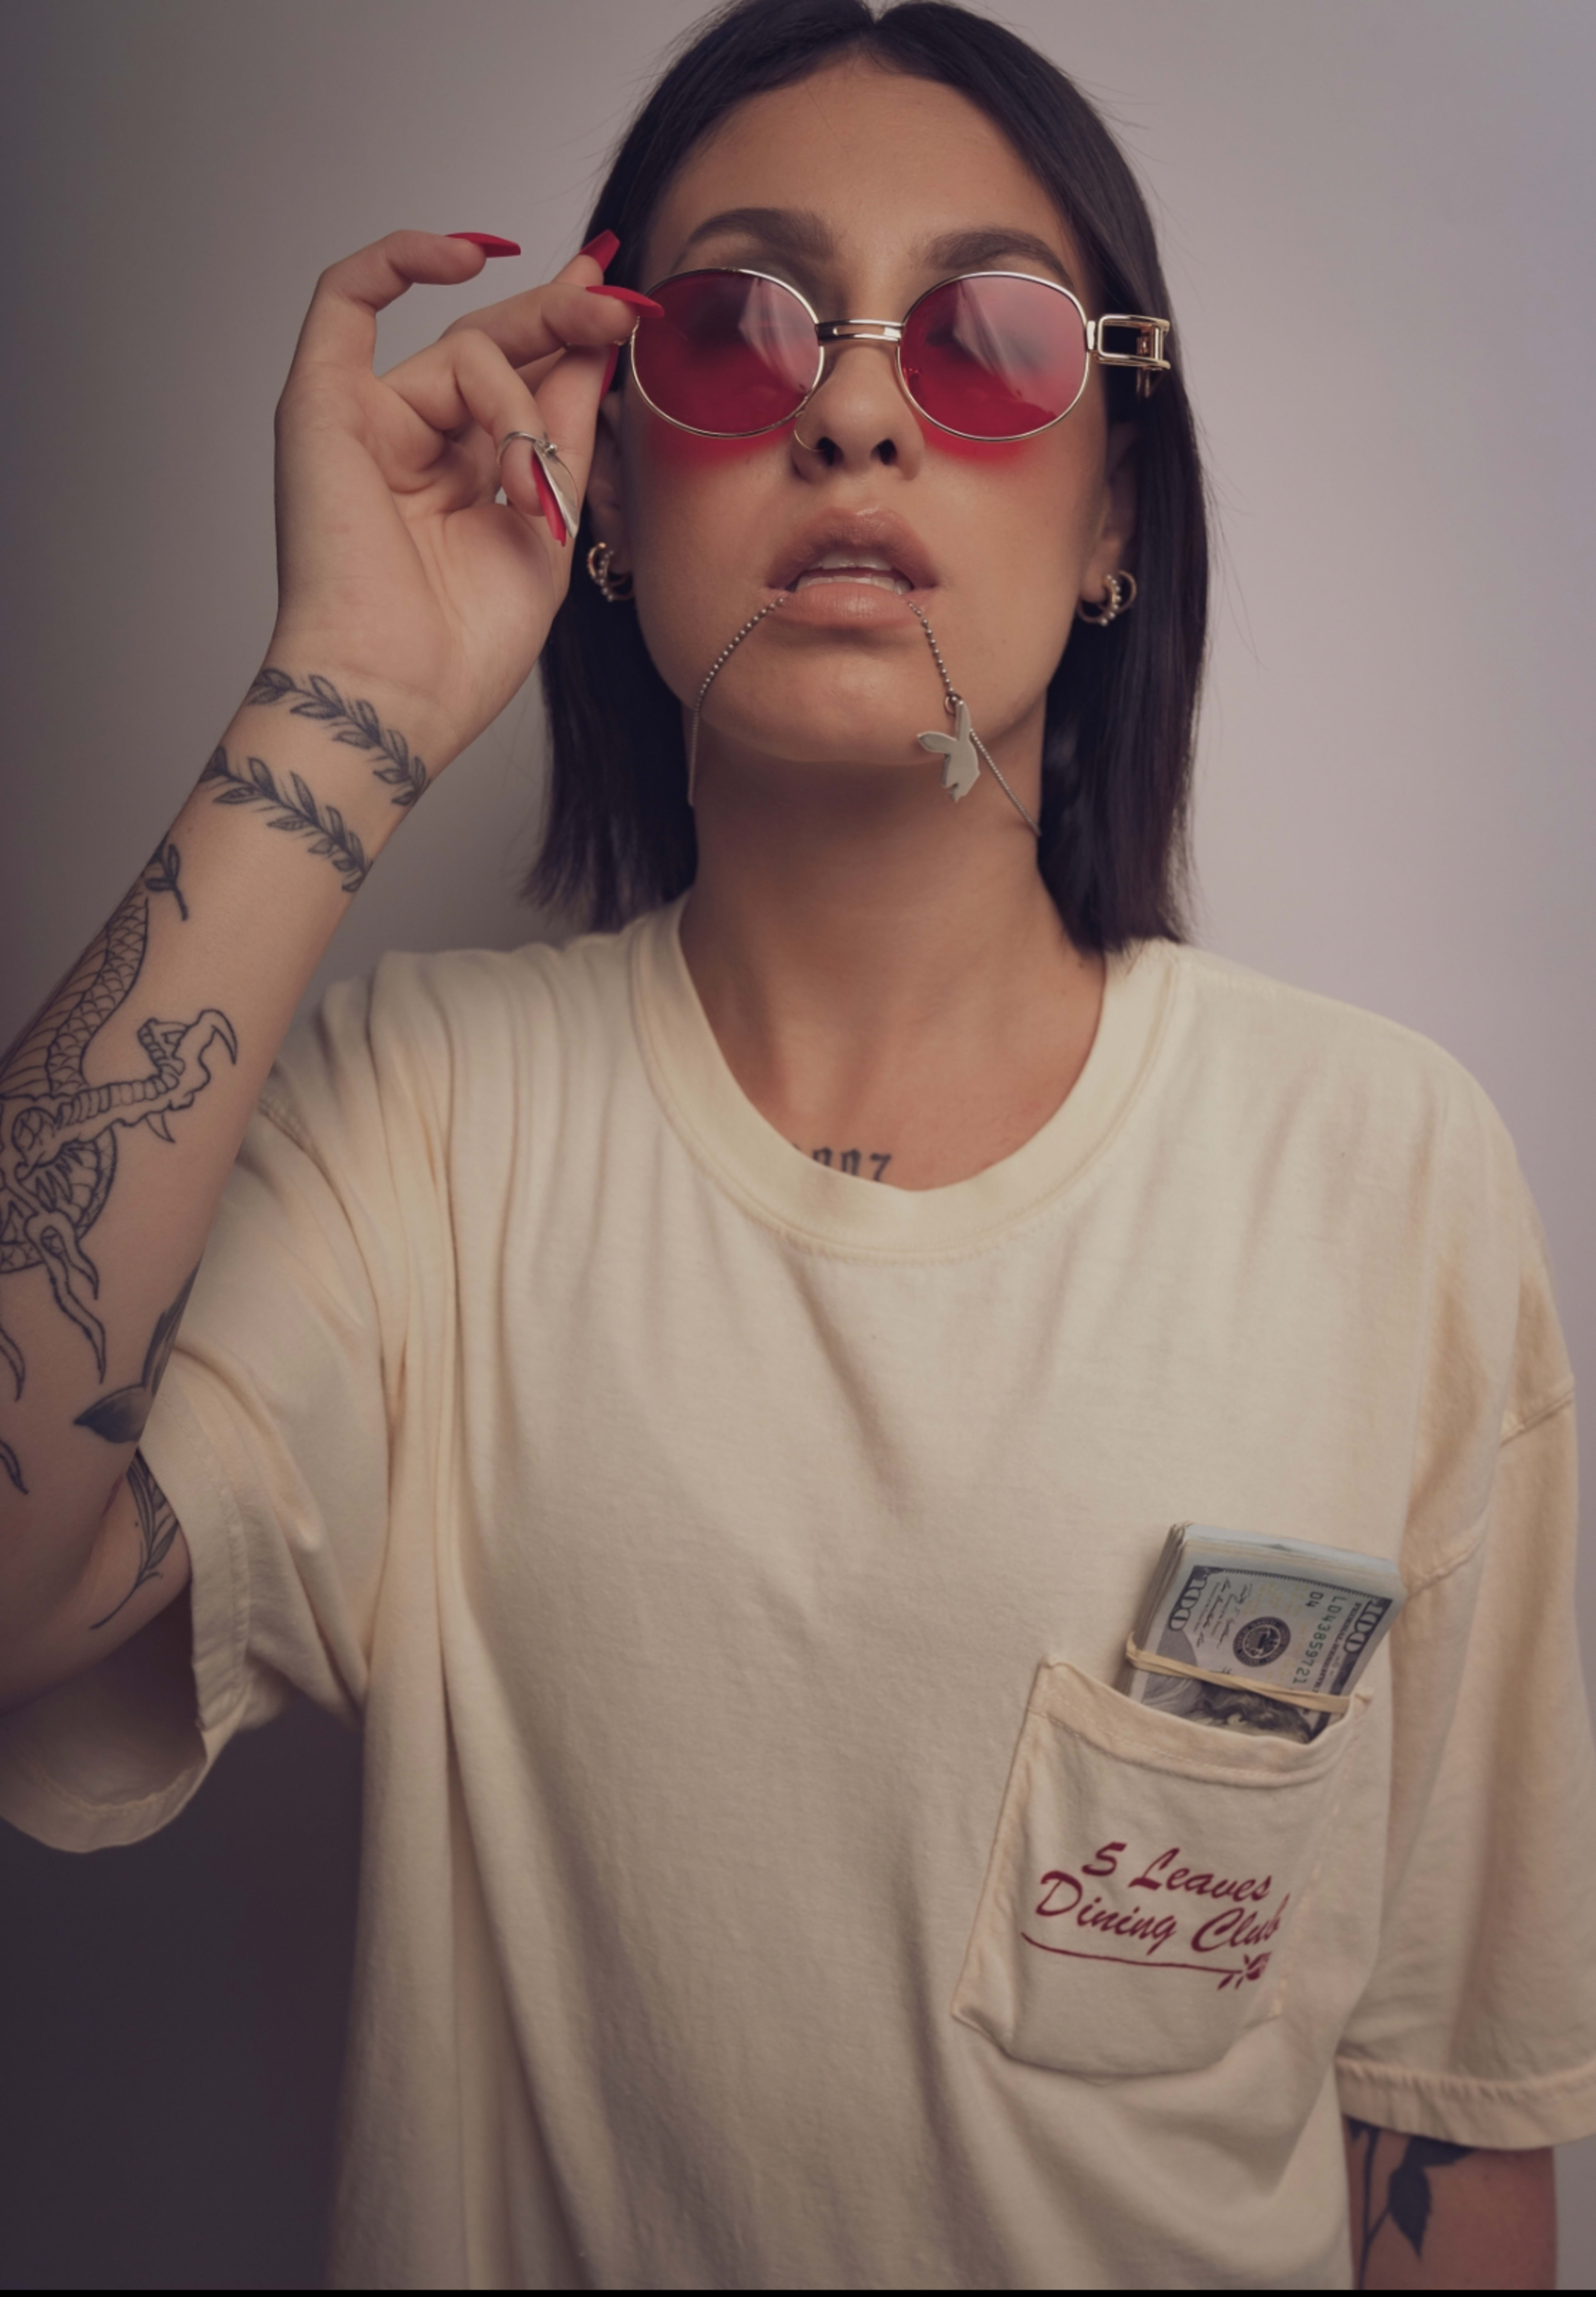 A fashion model with tattoos in a white shirt and red glasses with money posing for a photoshoot.